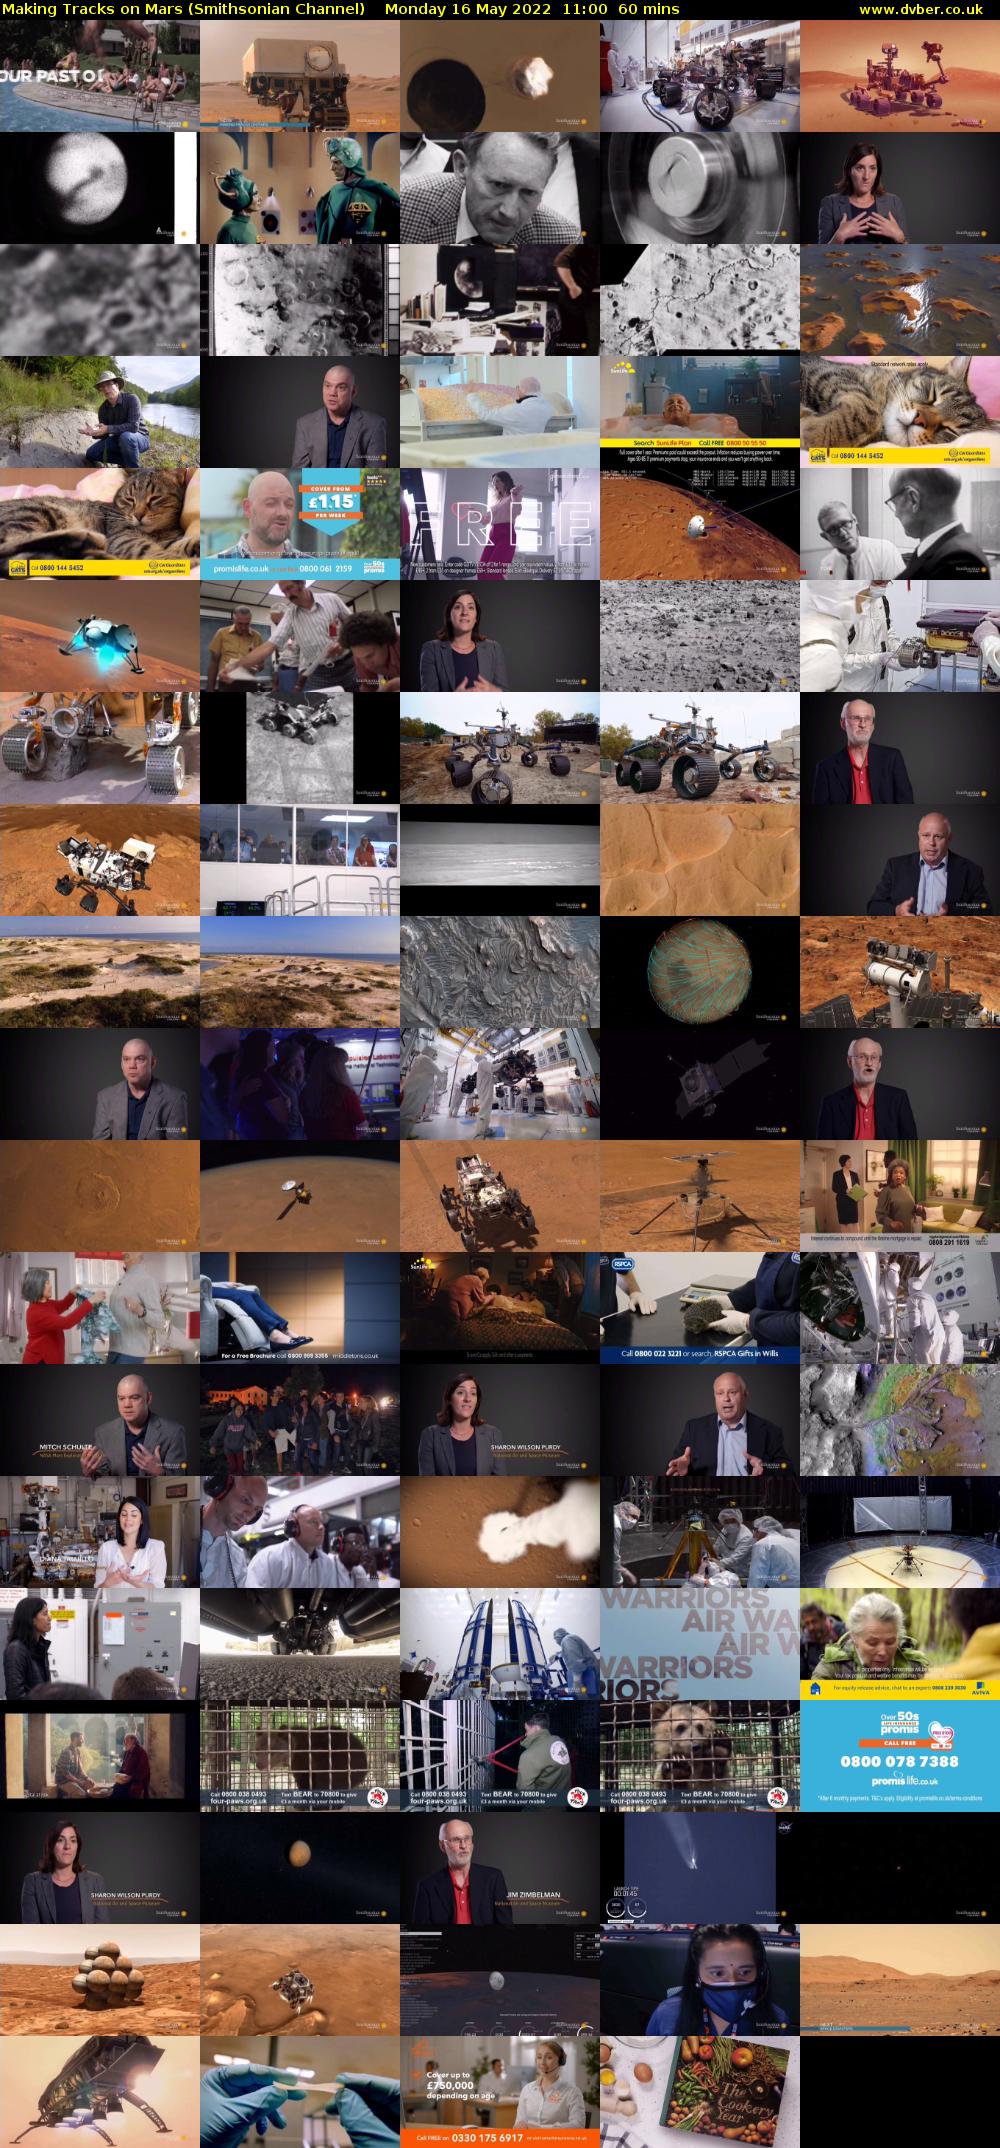 Making Tracks on Mars (Smithsonian Channel) Monday 16 May 2022 11:00 - 12:00